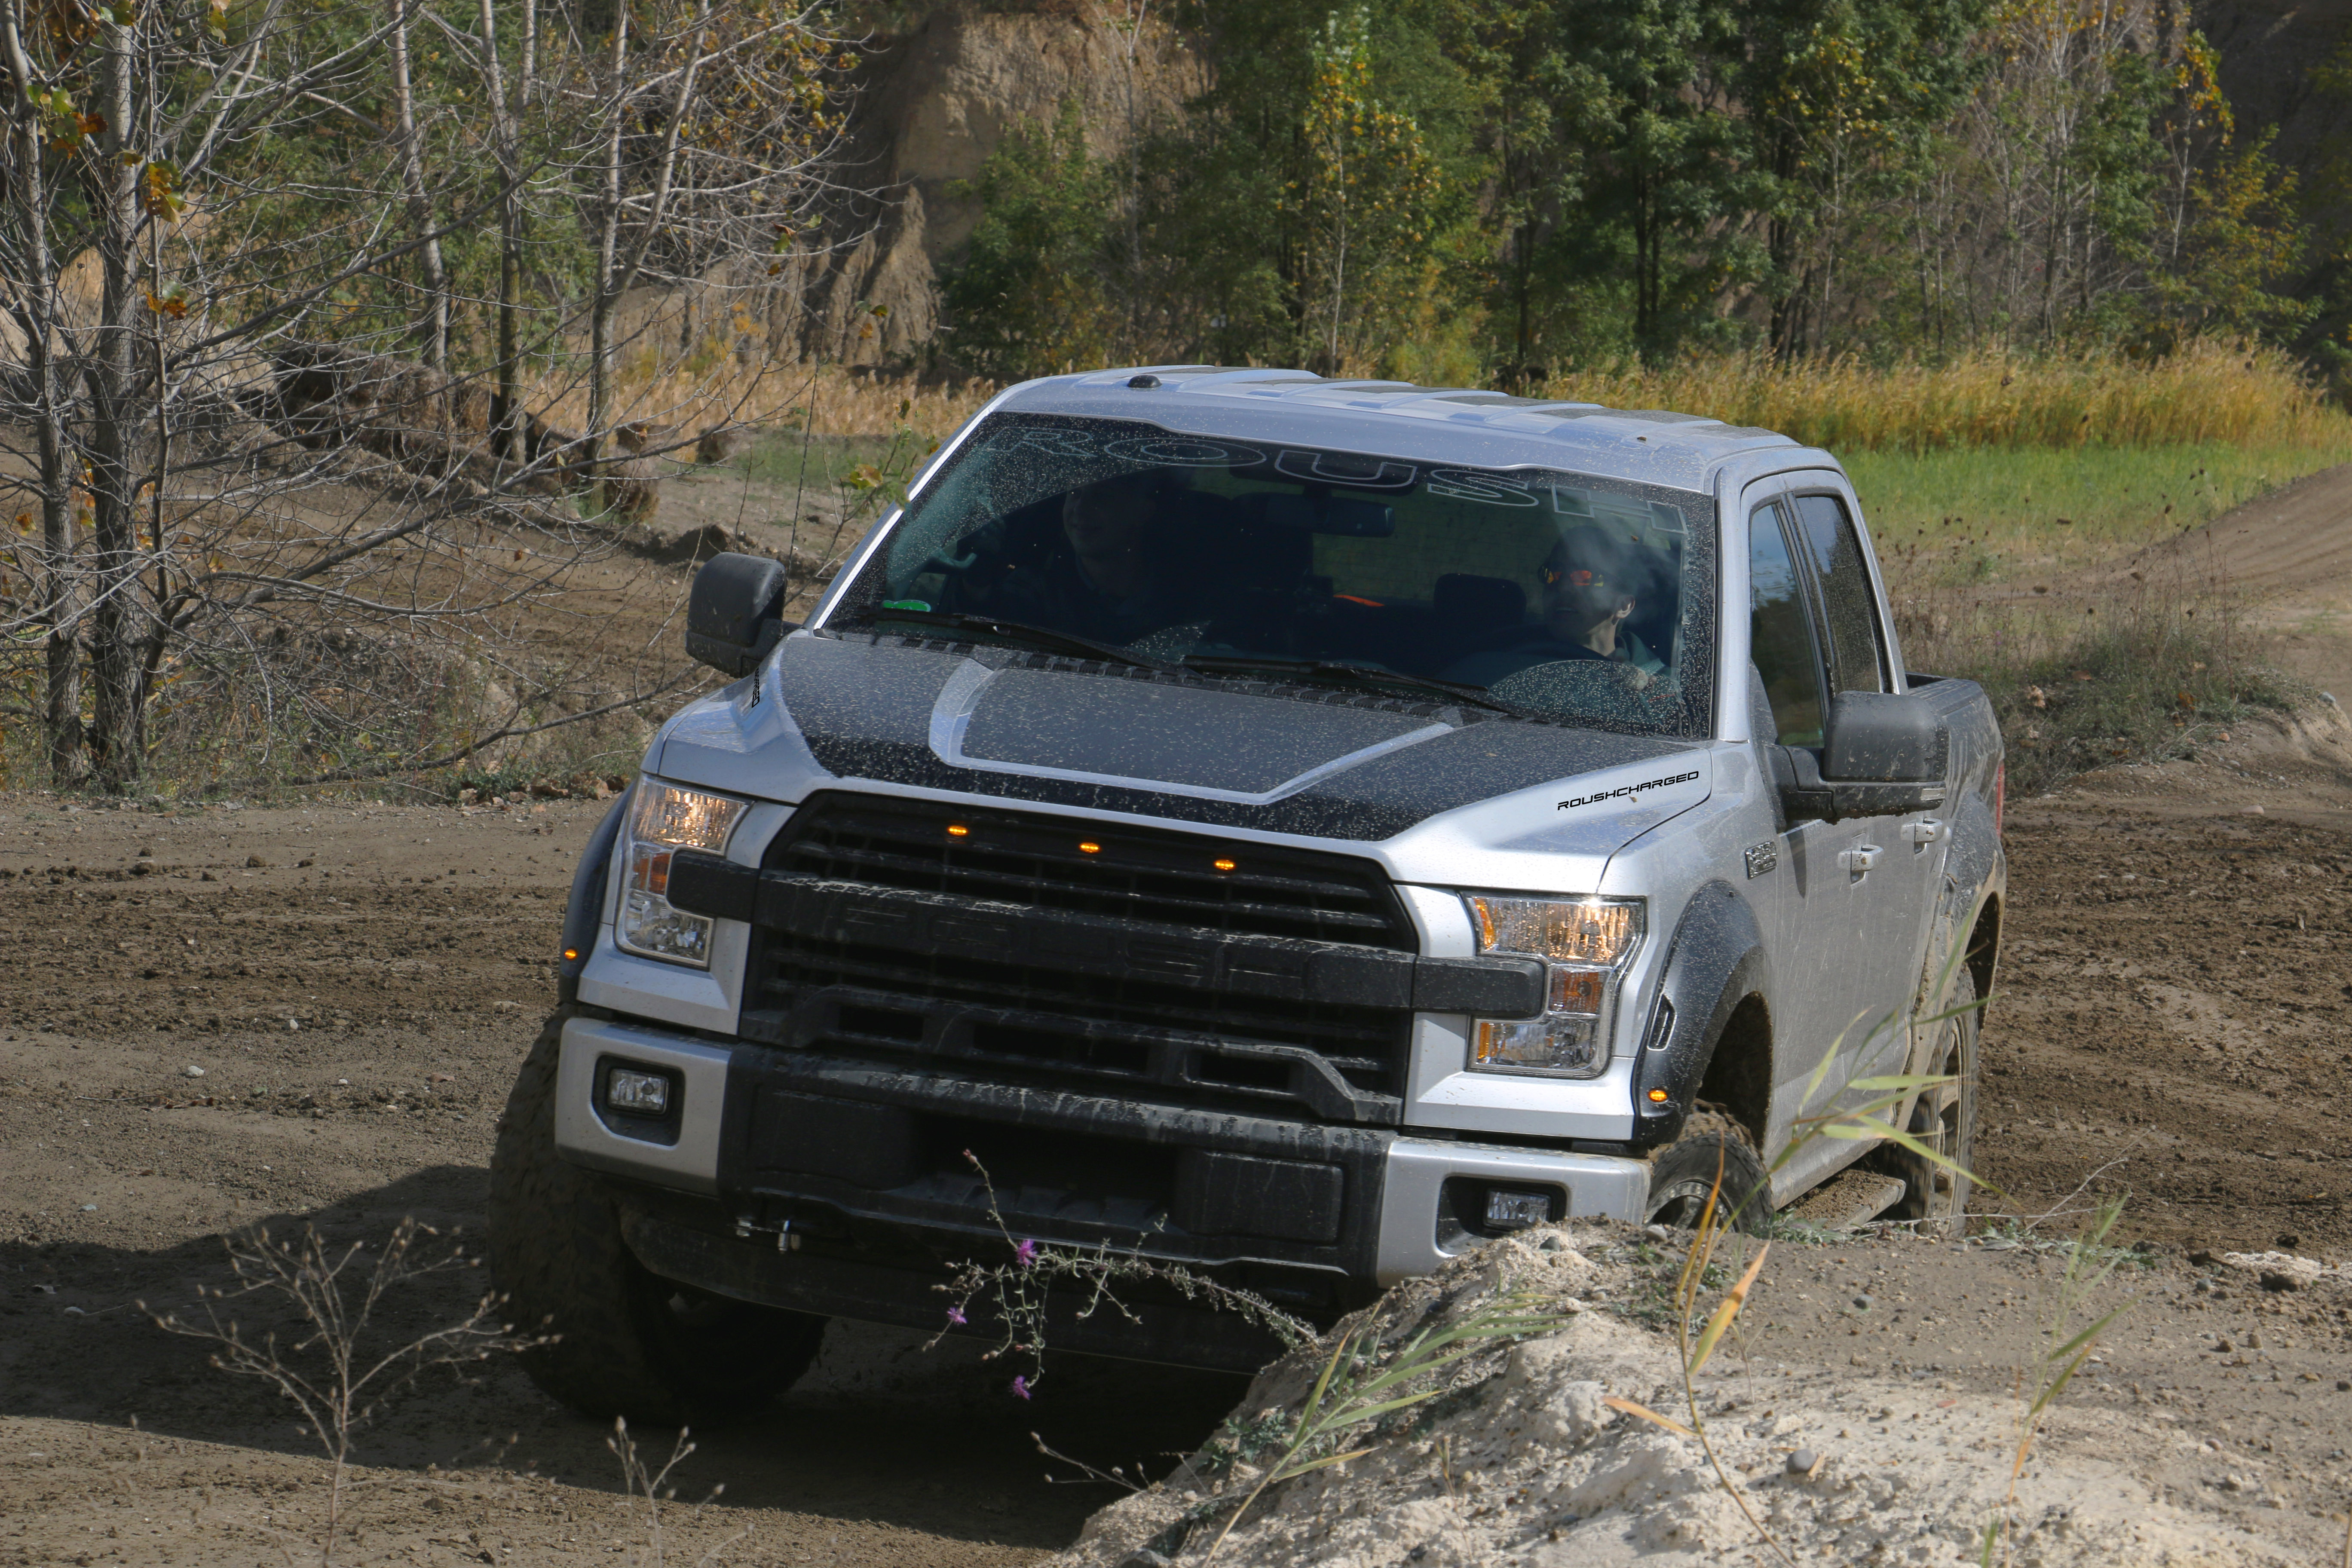 A ROUSH/Fox 2.0 Performance Series Suspension System, featuring front coil-overs and rear shocks with boots, means the 2016 ROUSH F-150 SC is as tough and nimble off-road as it is on-road.